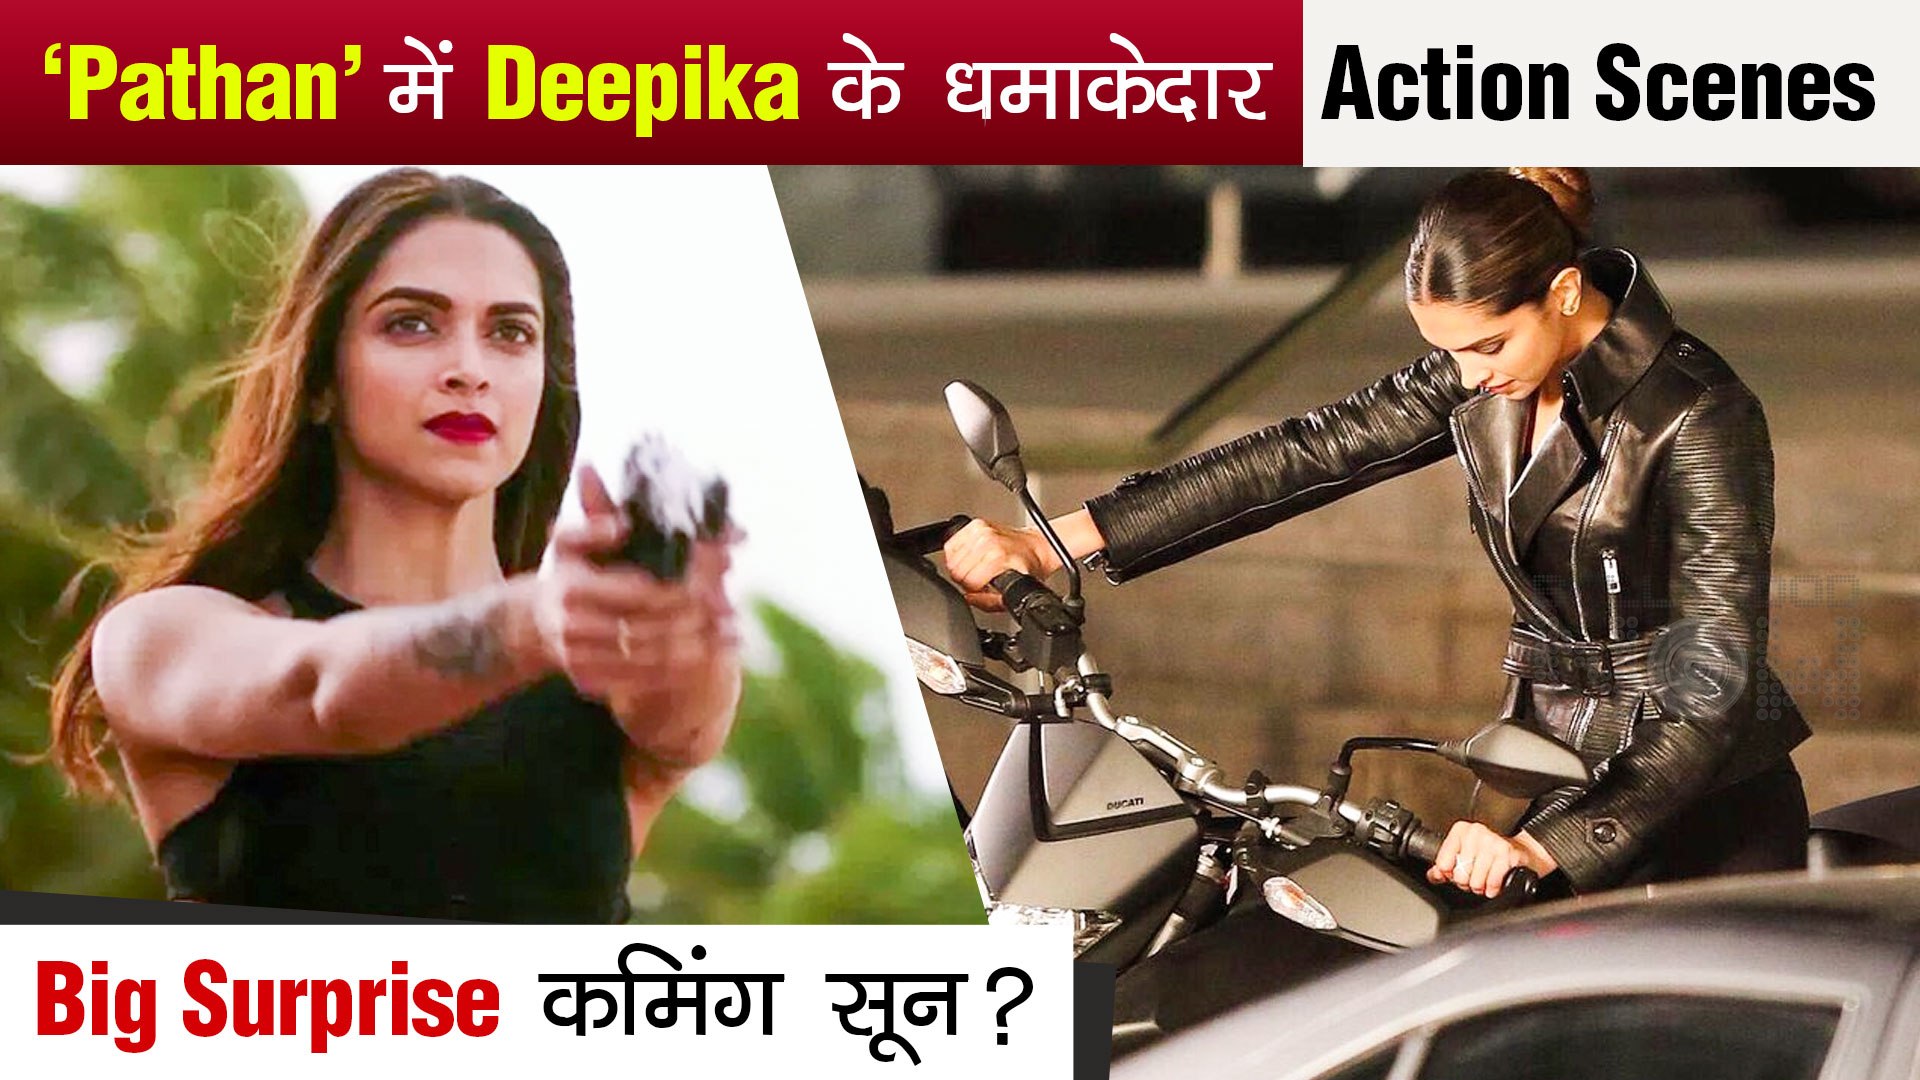 Dipika Kakar Body Funy Xxx - Deepika Padukone To Perform Some BIG Action Sequences In The Film 'Pathan'  - video Dailymotion